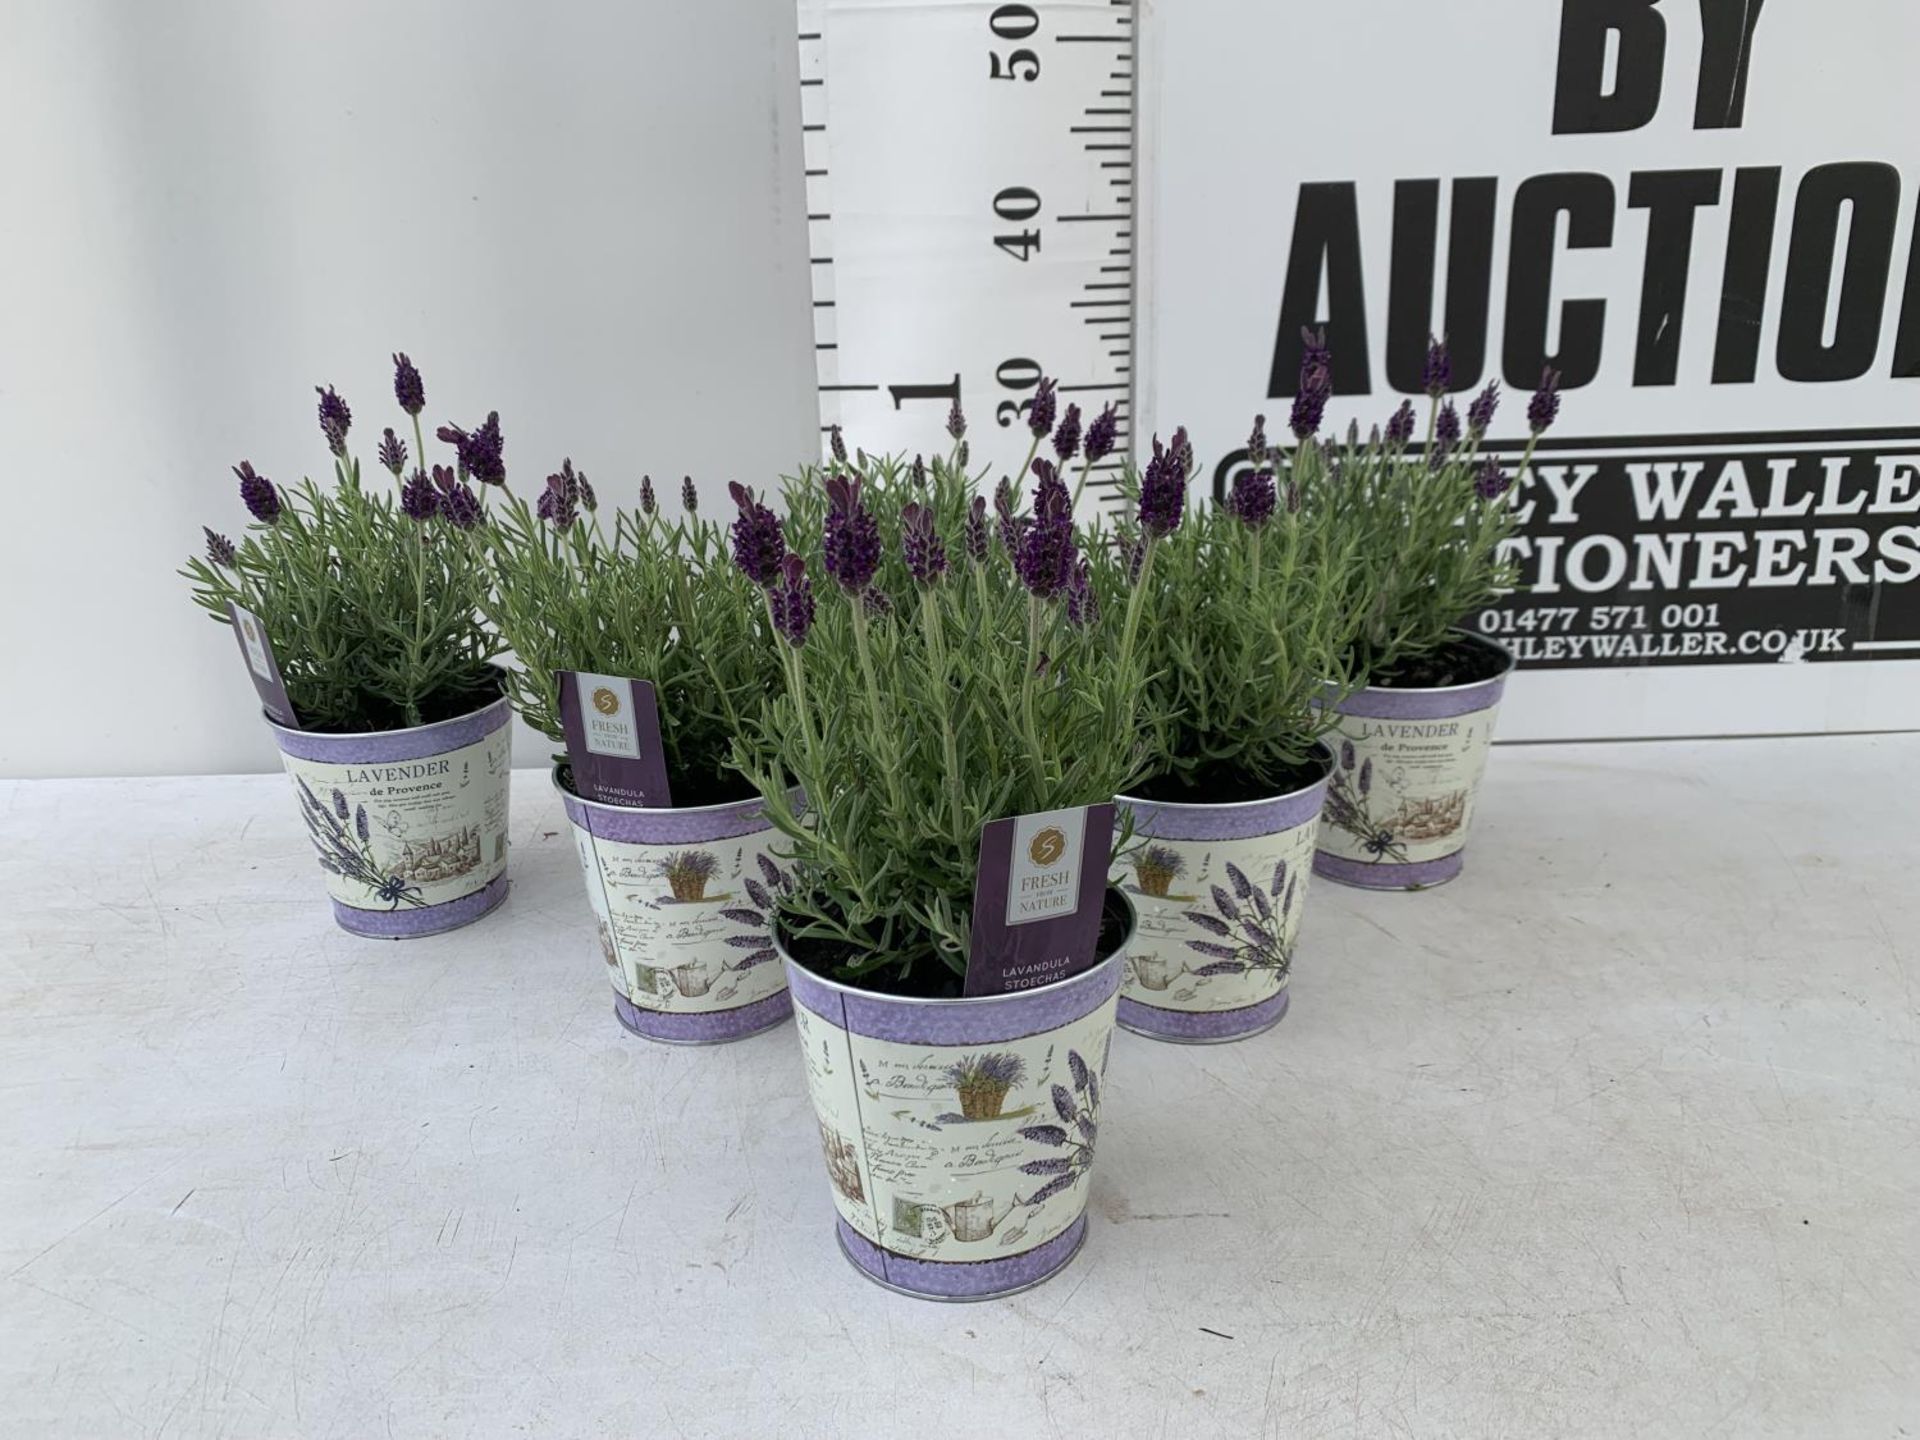 SIX LAVENDULA LAVENDER ST ANOUK COLLECTION IN DECORATIVE METAL POTS TO BE SOLD FOR THE SIX NO VAT